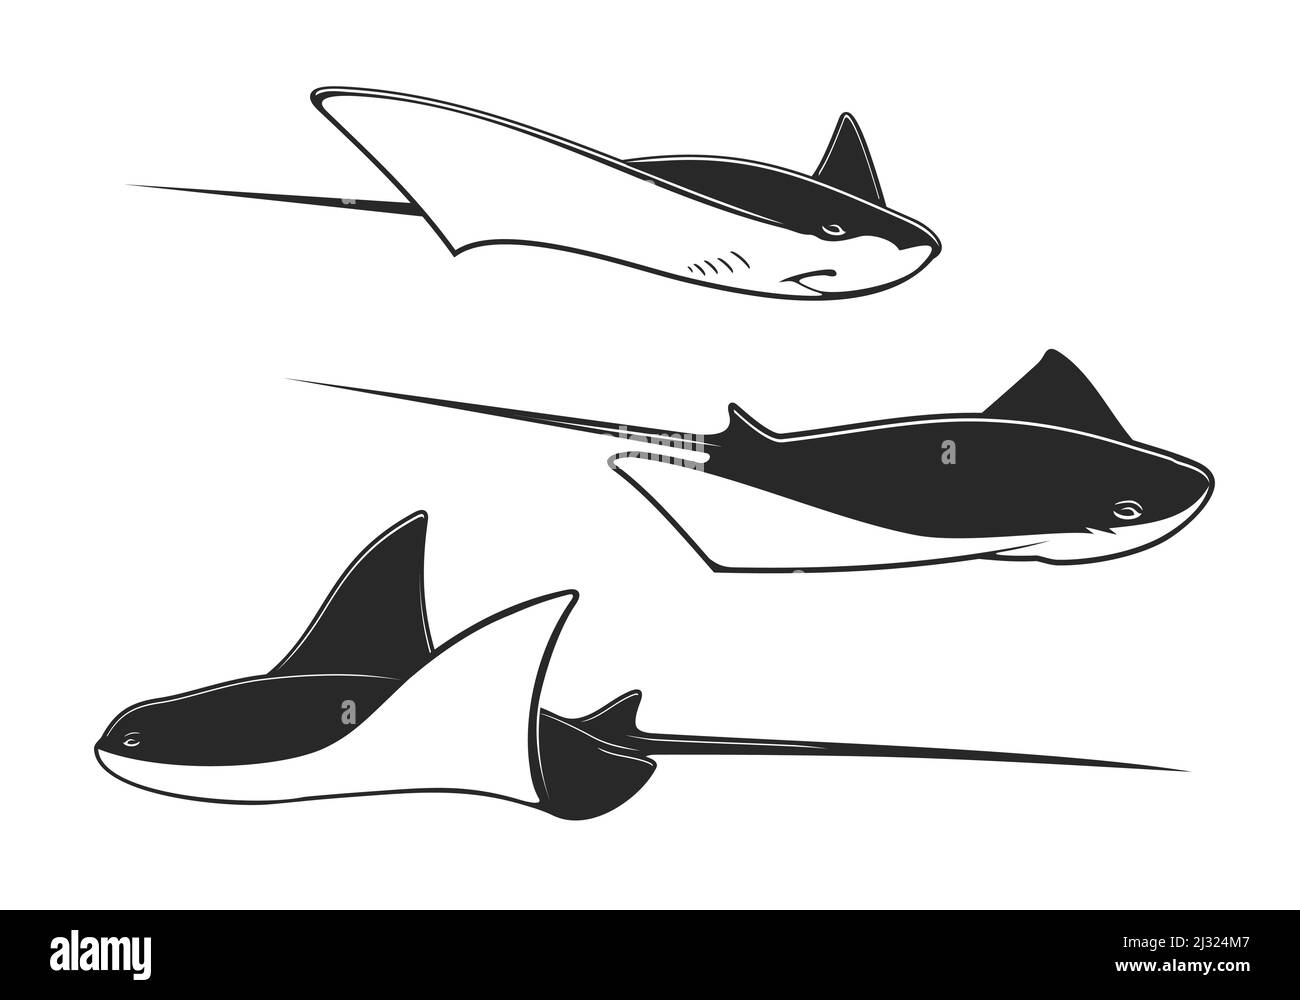 Manta ray, stingray and cramp fish underwater animals. Isolated ocean or sea vector fish, black and white rays with long stingers and tails, tropical marine water wildlife, zoo aquarium Stock Vector